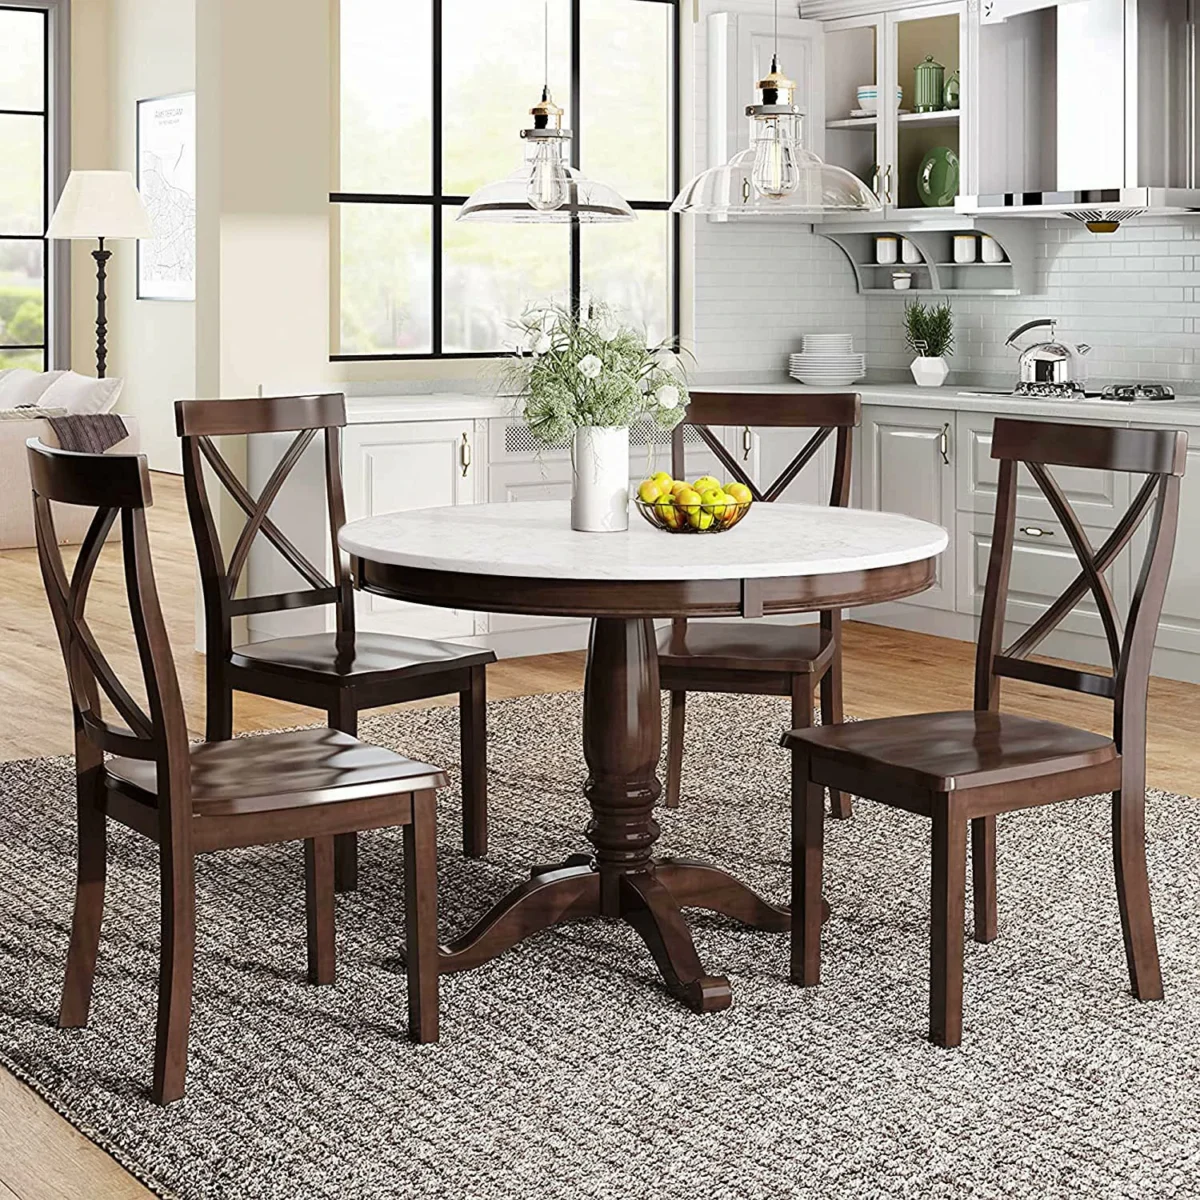 Aprodz Vikra Solid Wood Round Dining Table Set | 4-Seater |